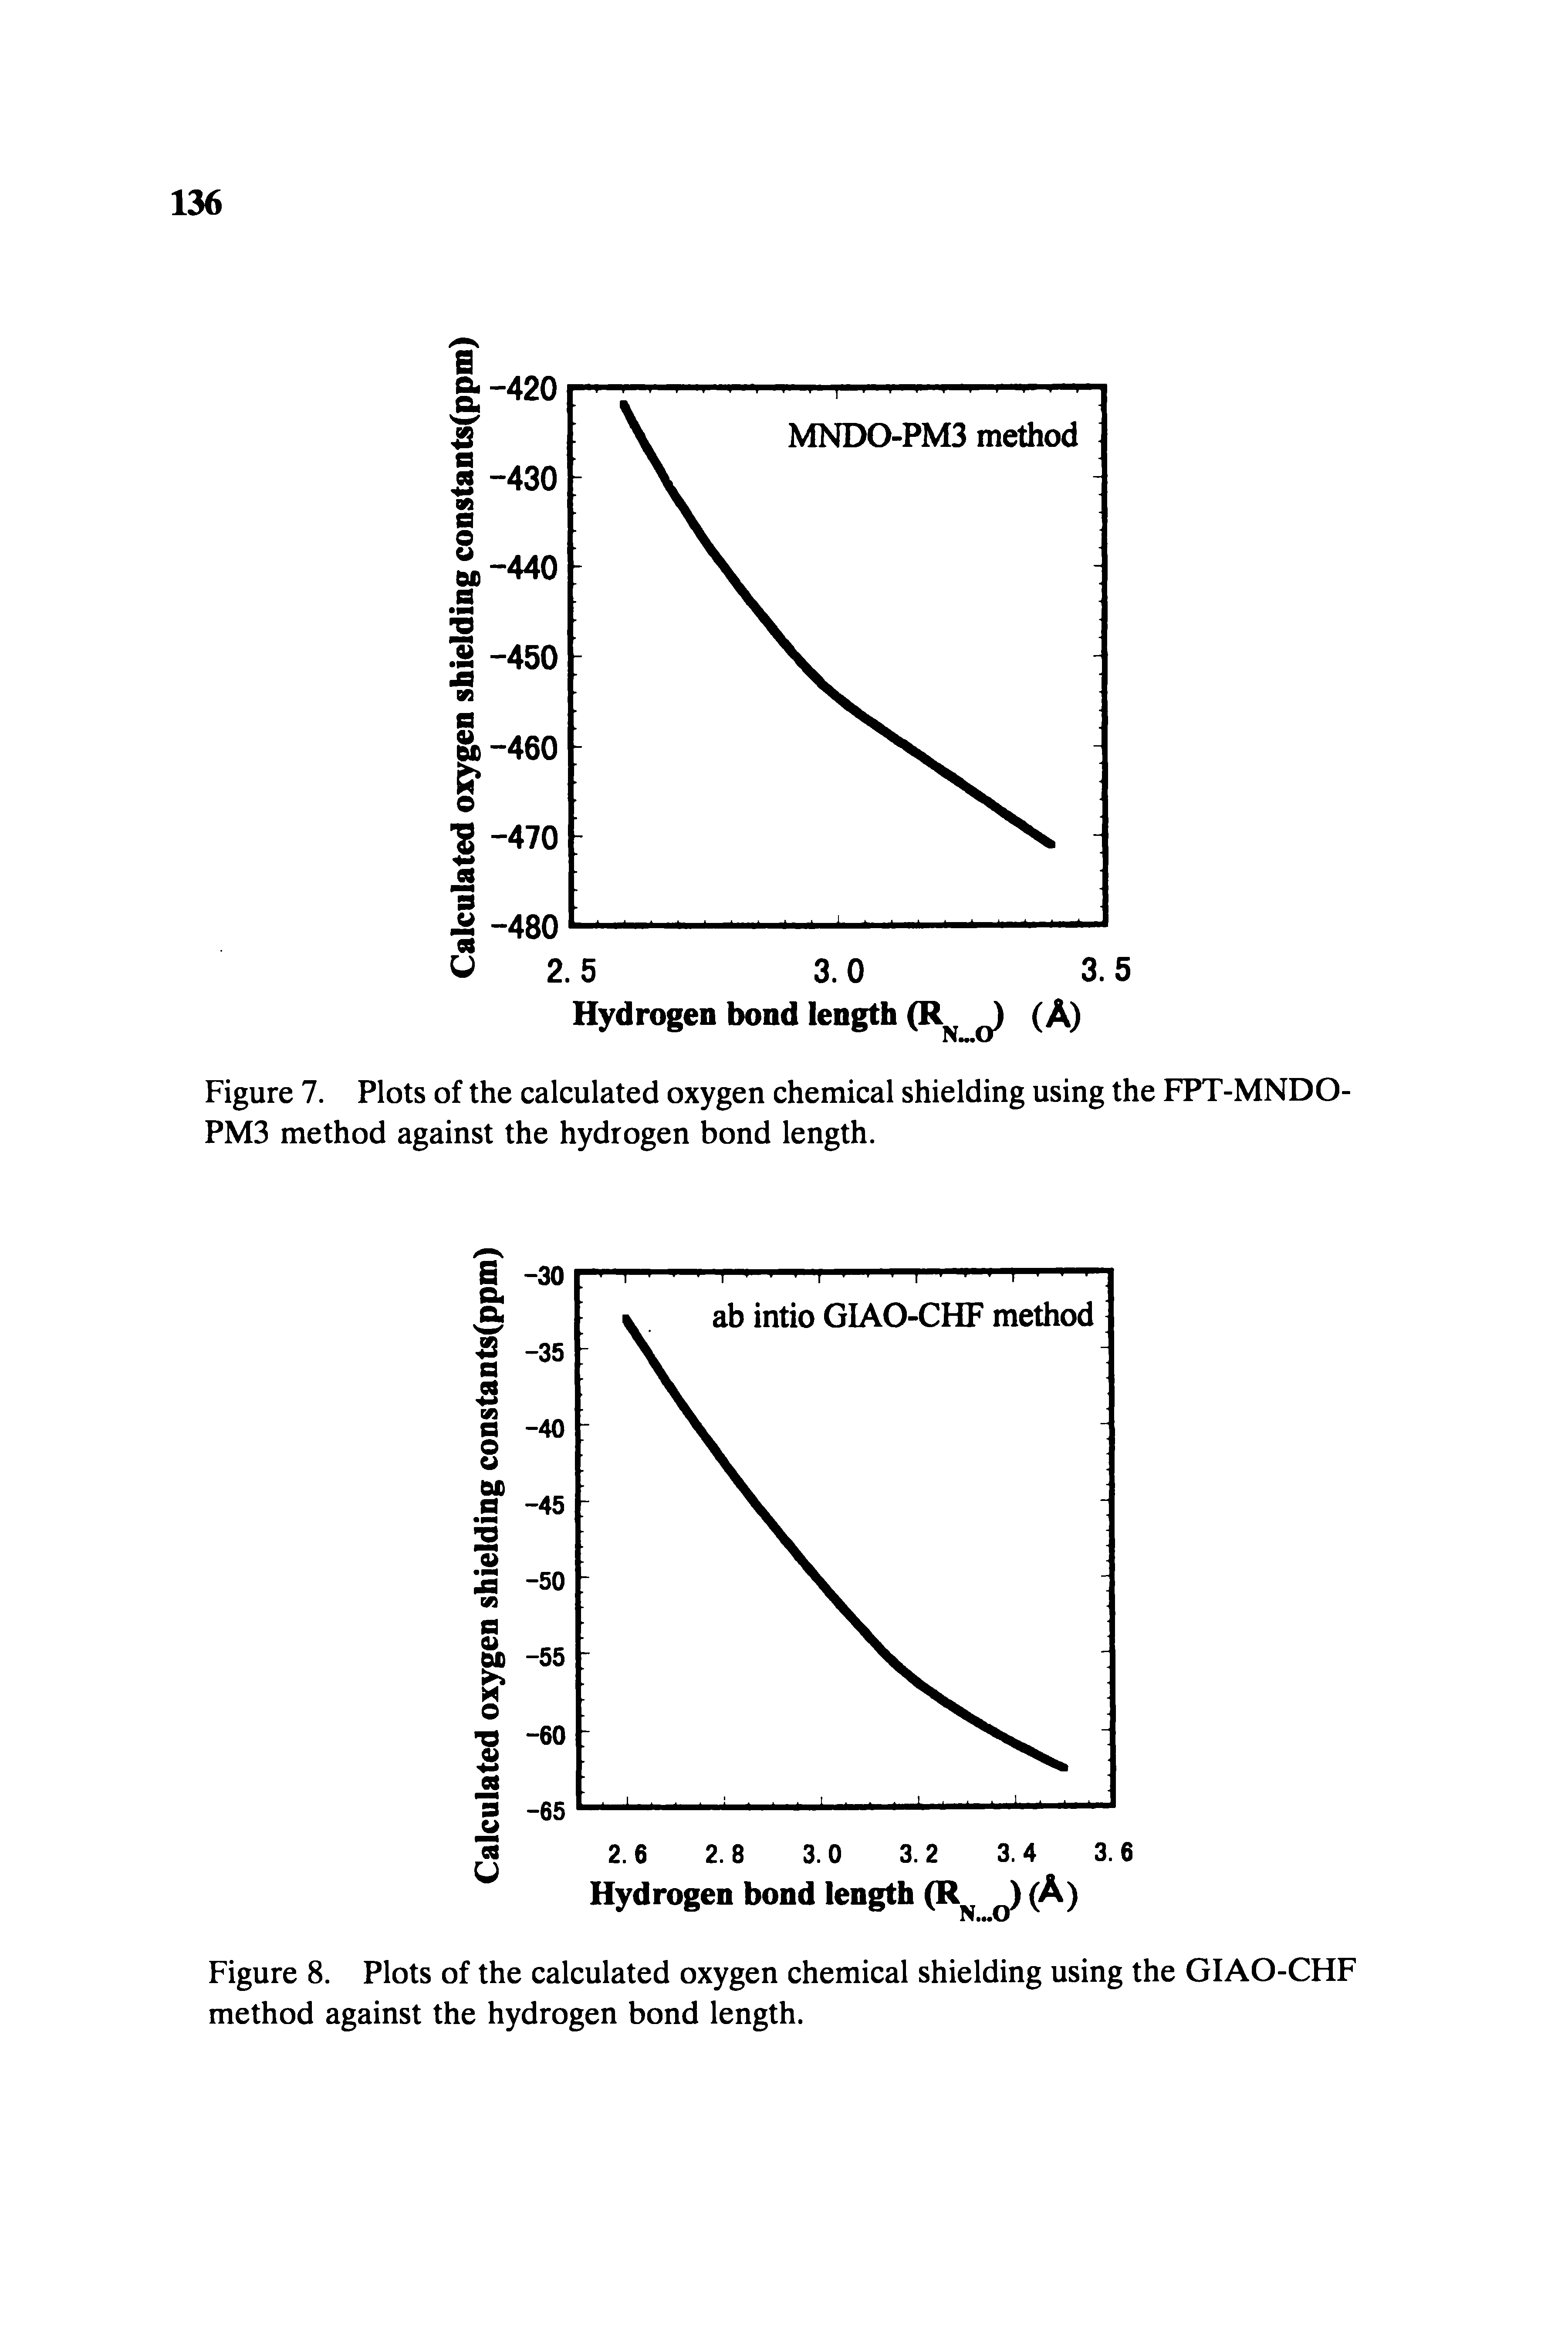 Figure 8. Plots of the calculated oxygen chemical shielding using the GIAO-CHF method against the hydrogen bond length.